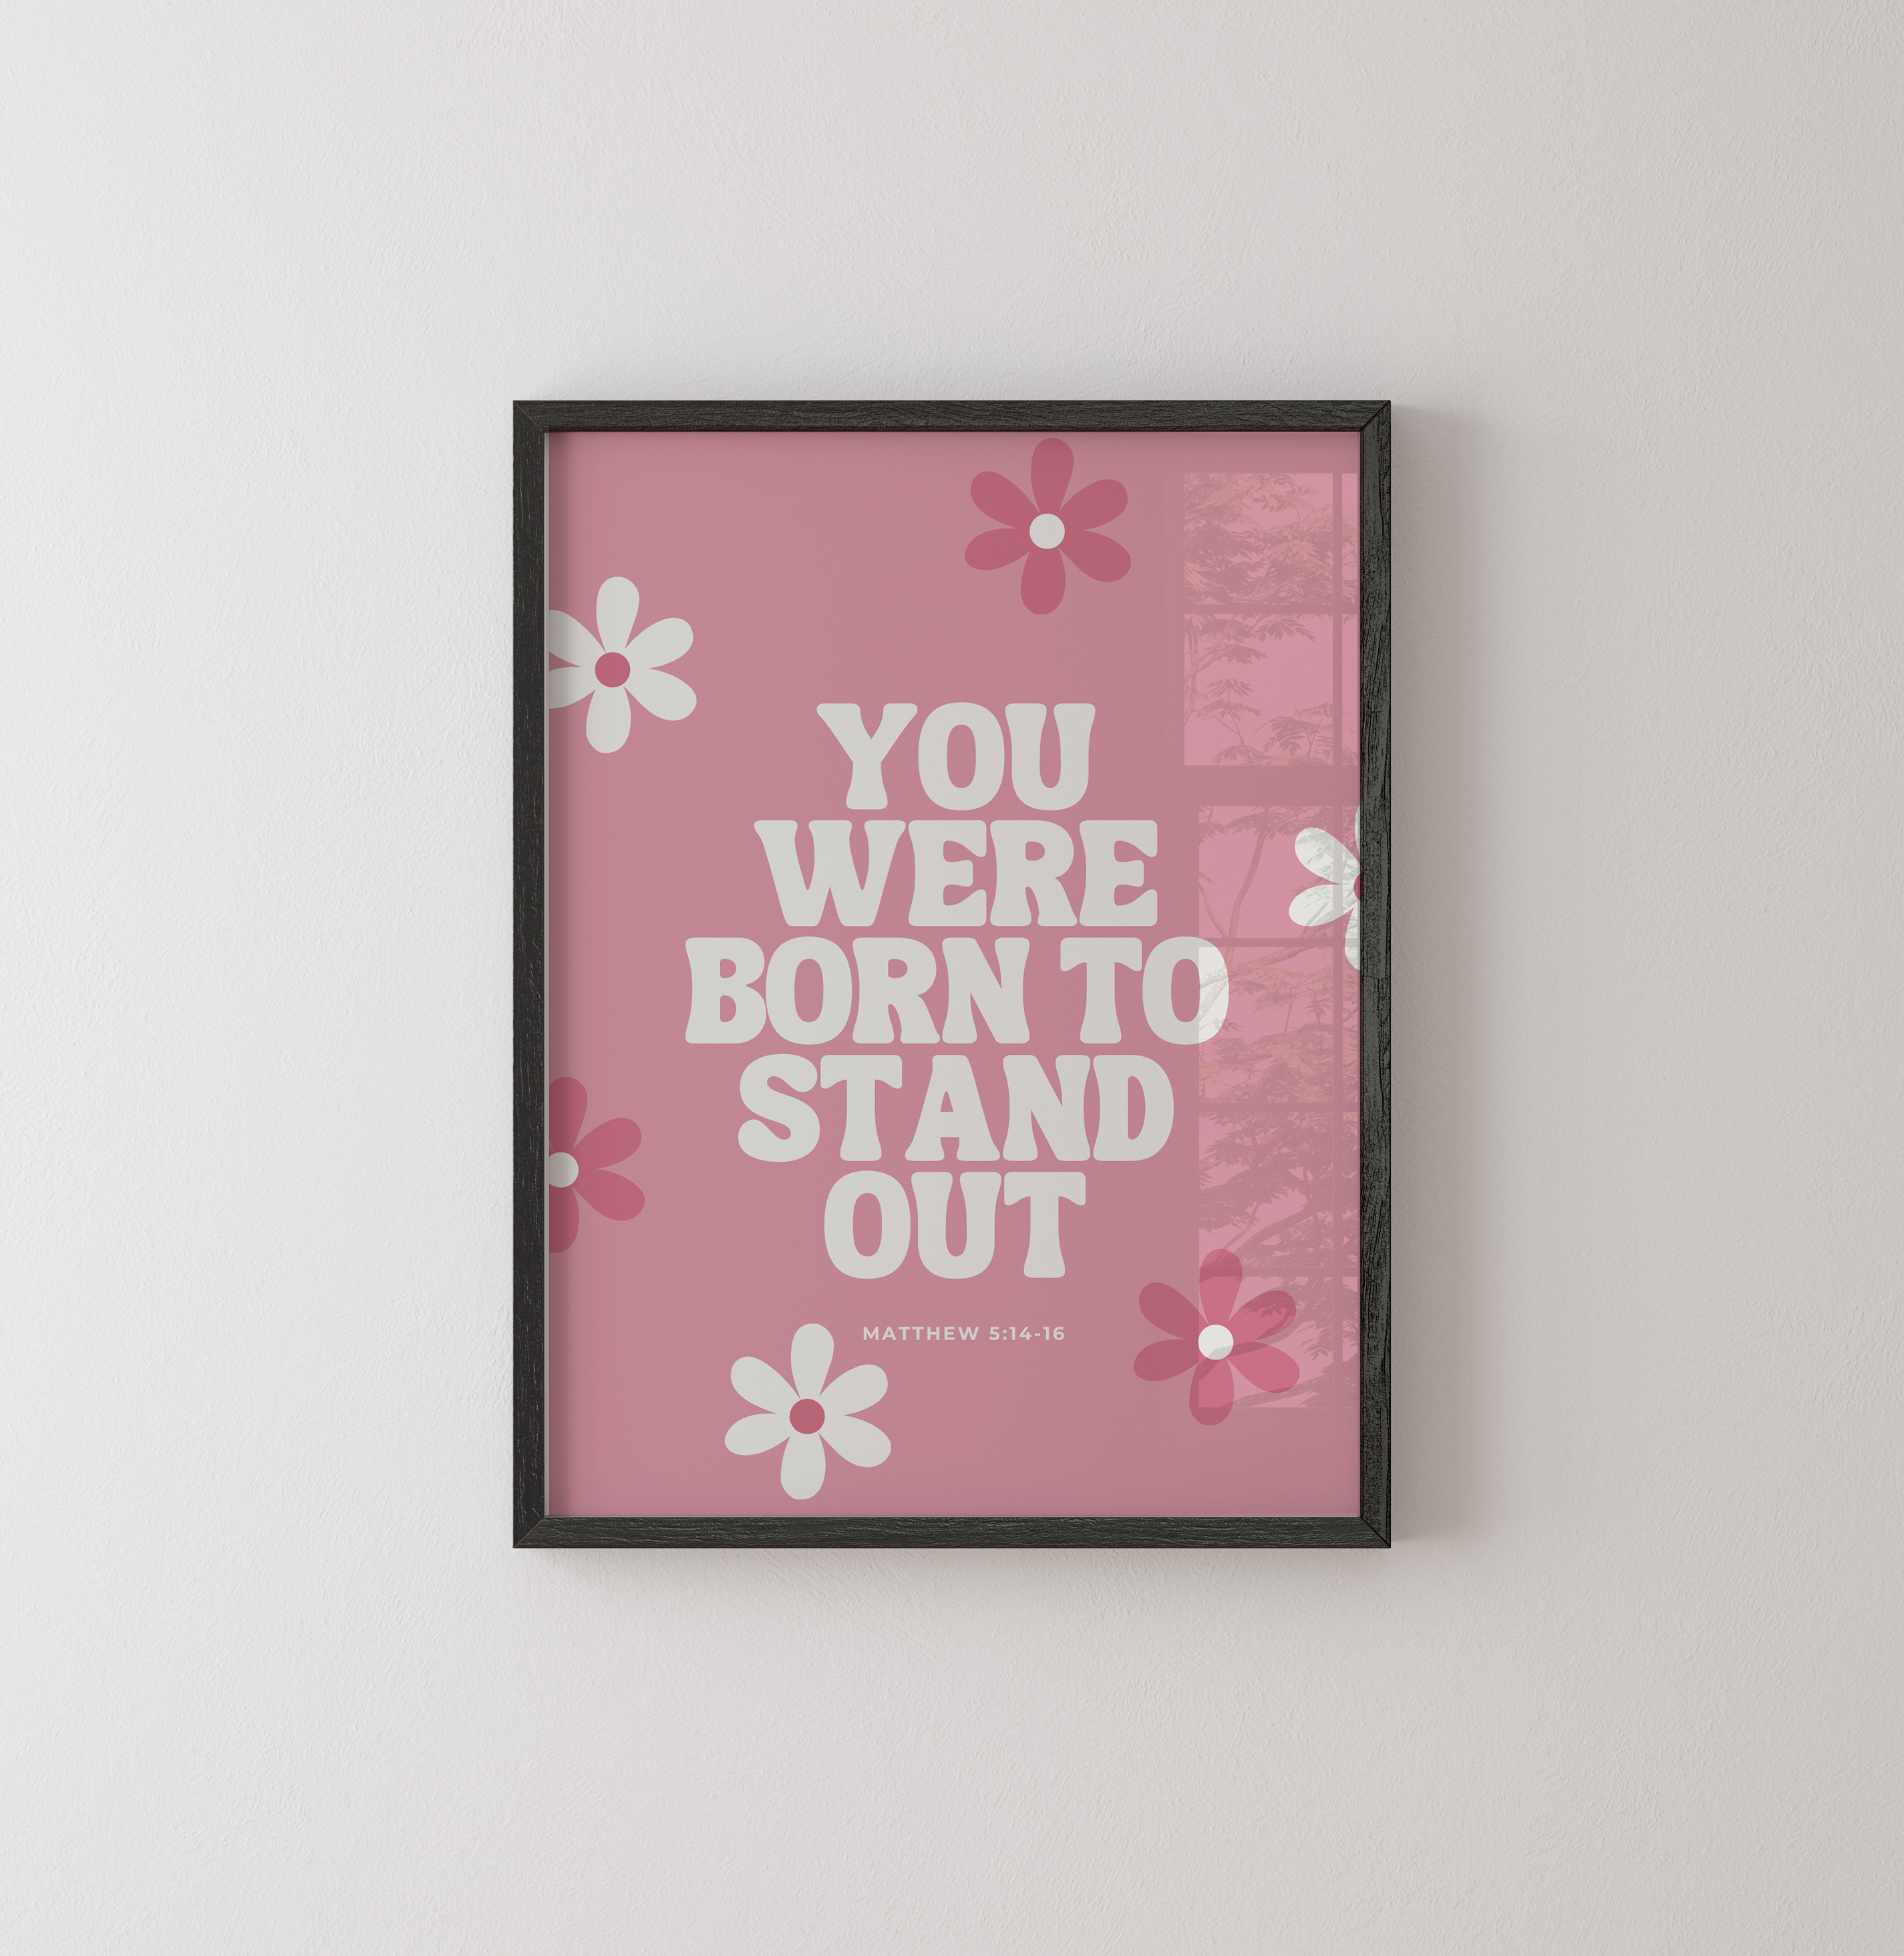 Born to Stand Out - Floral Christian Art Print